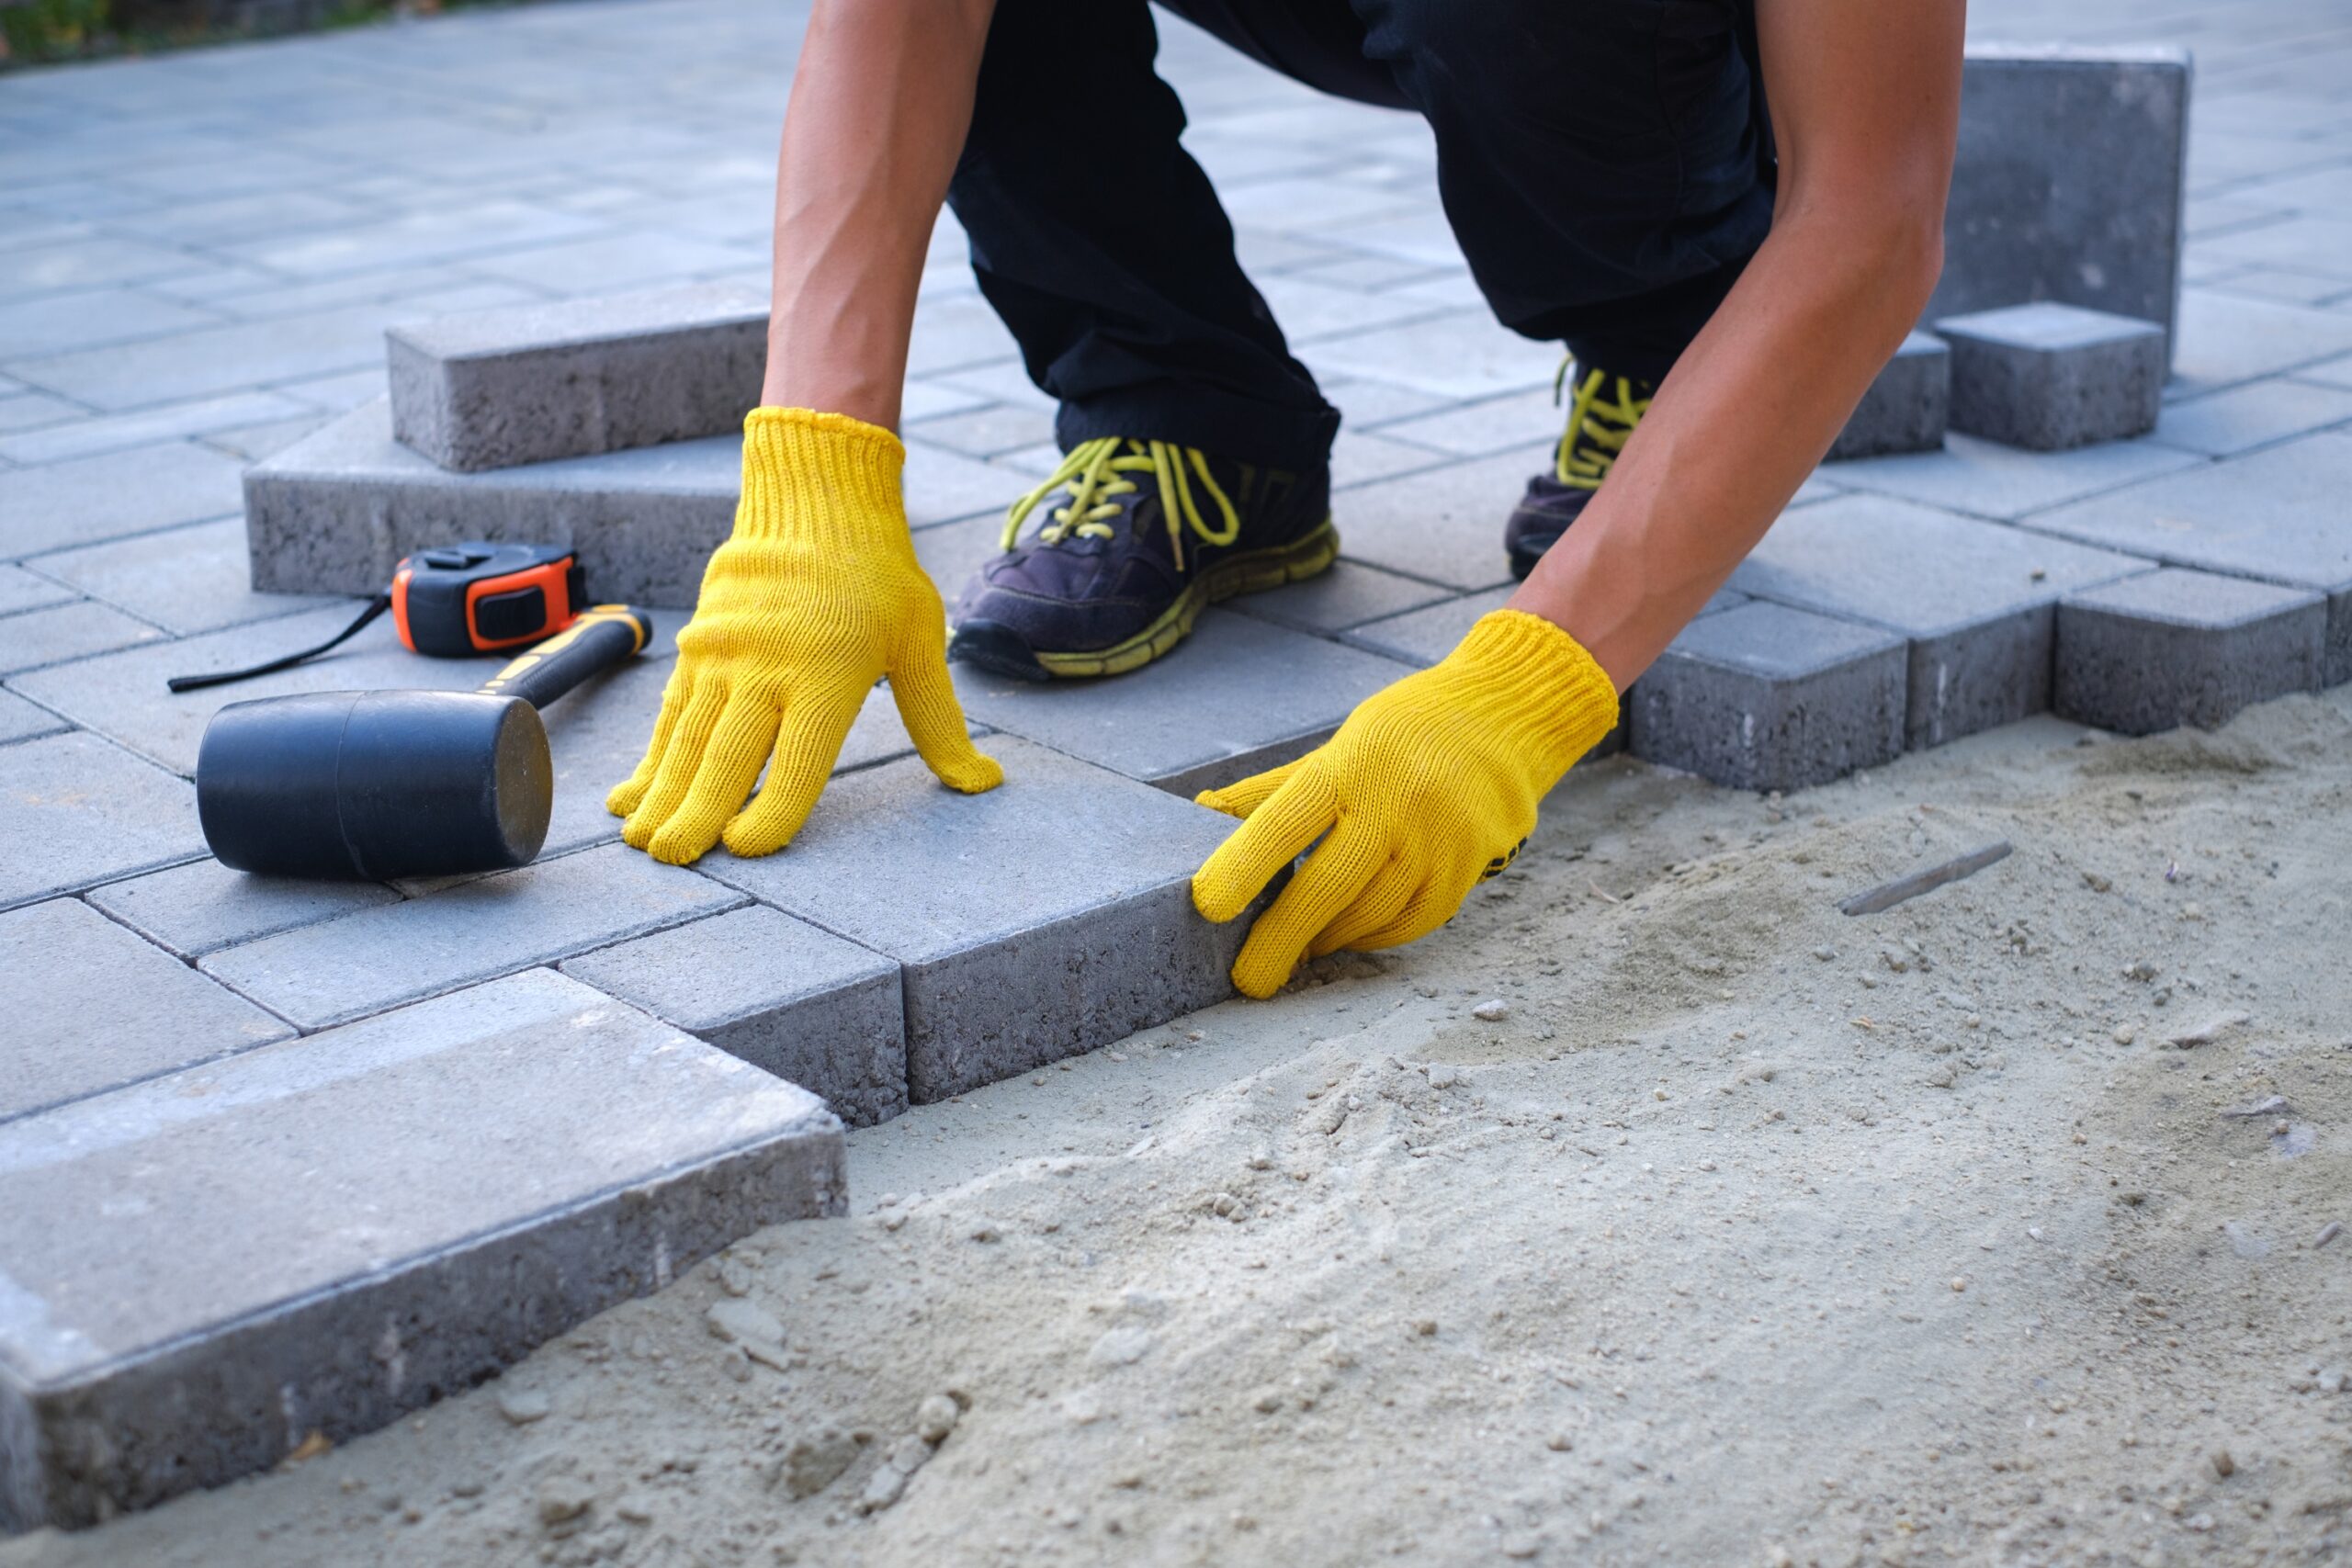 Paving stones - choosing the right material